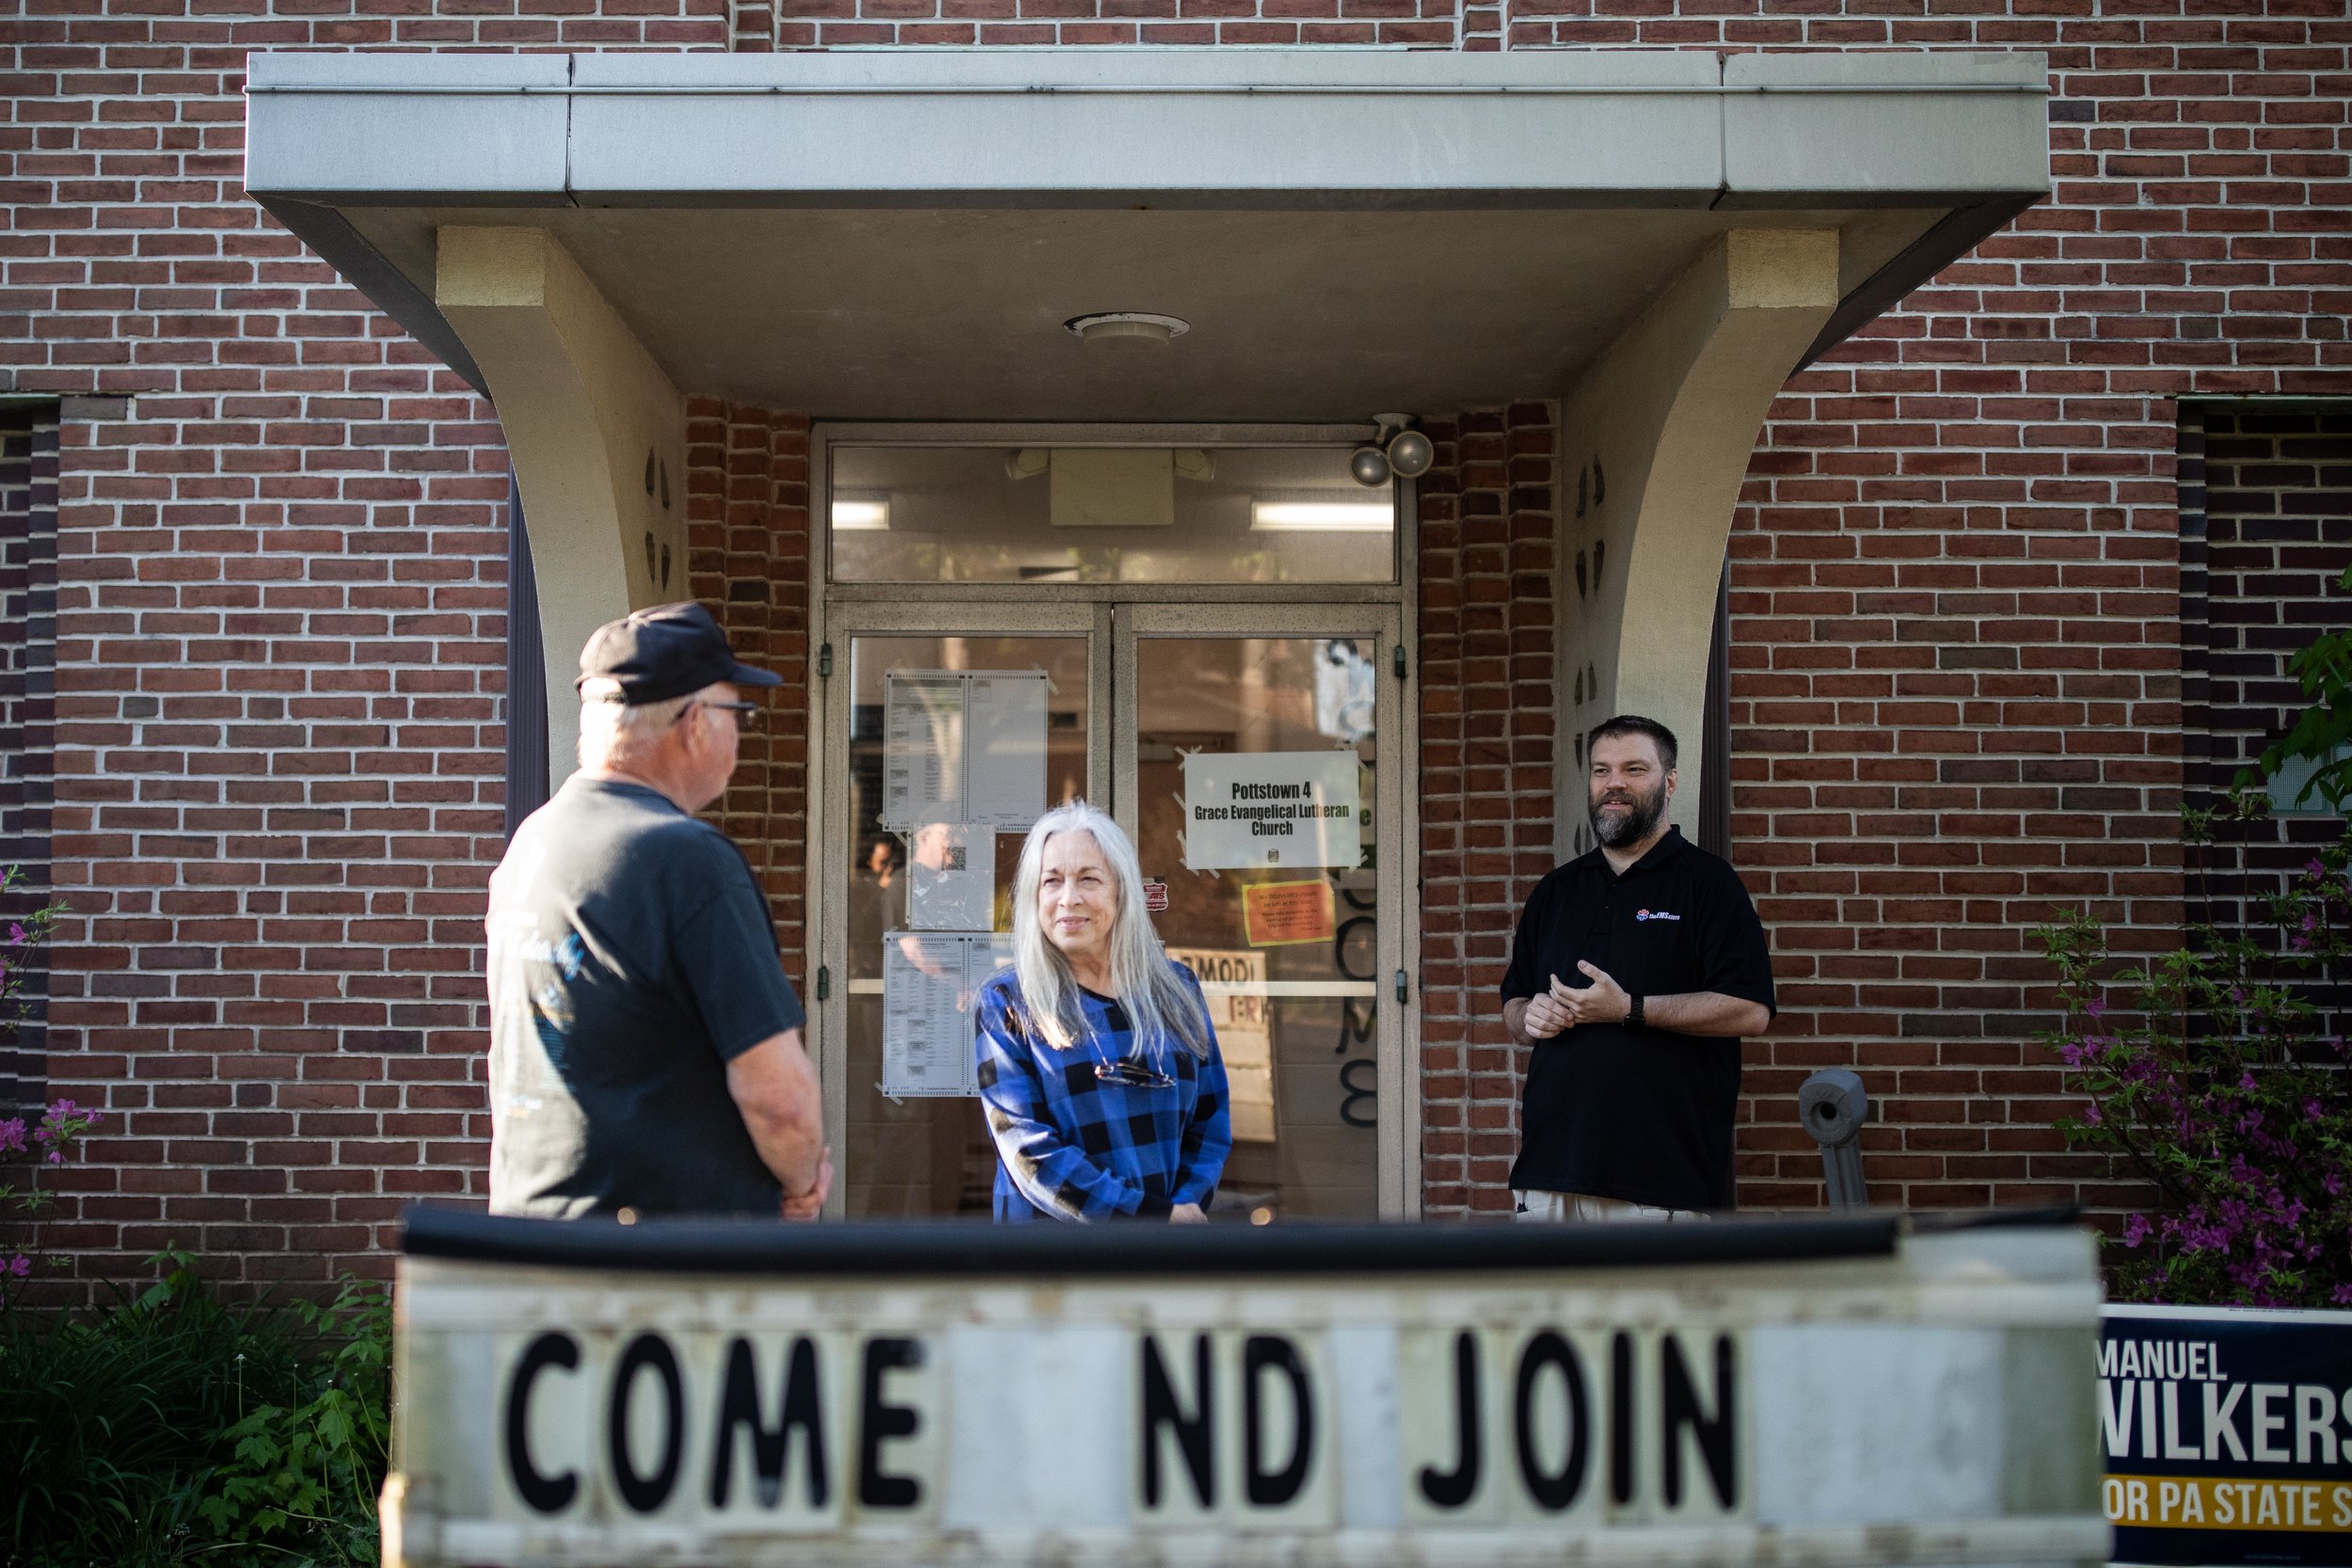   People wait outside a polling place in southwestern Pennsylvania during the primary election in May 2022.  